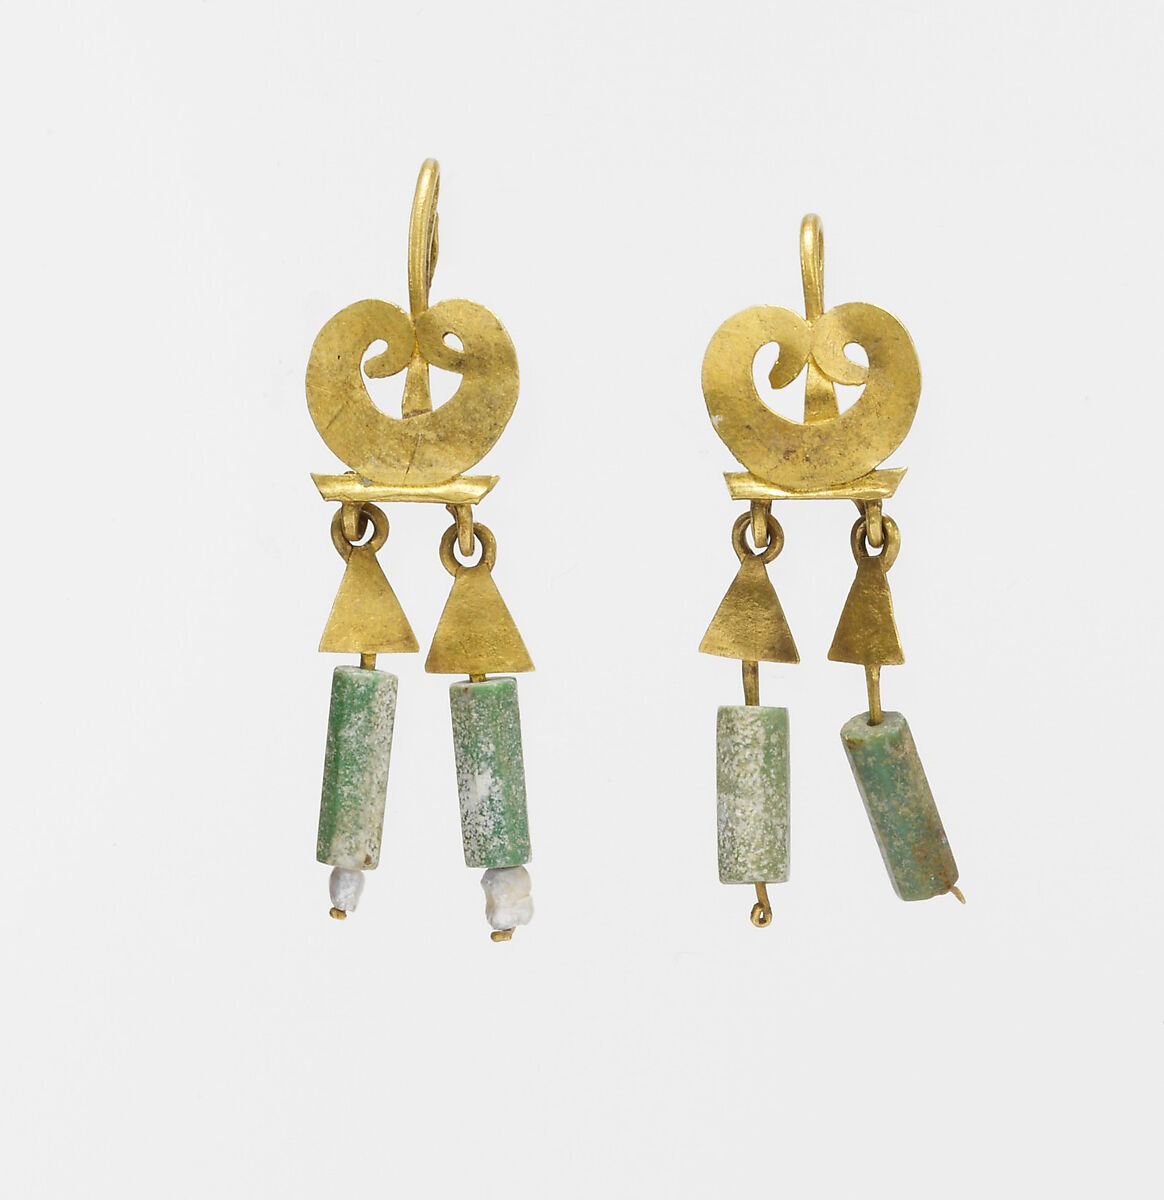 Gold and chalcedony earrings, Gold, chalcedony, Roman